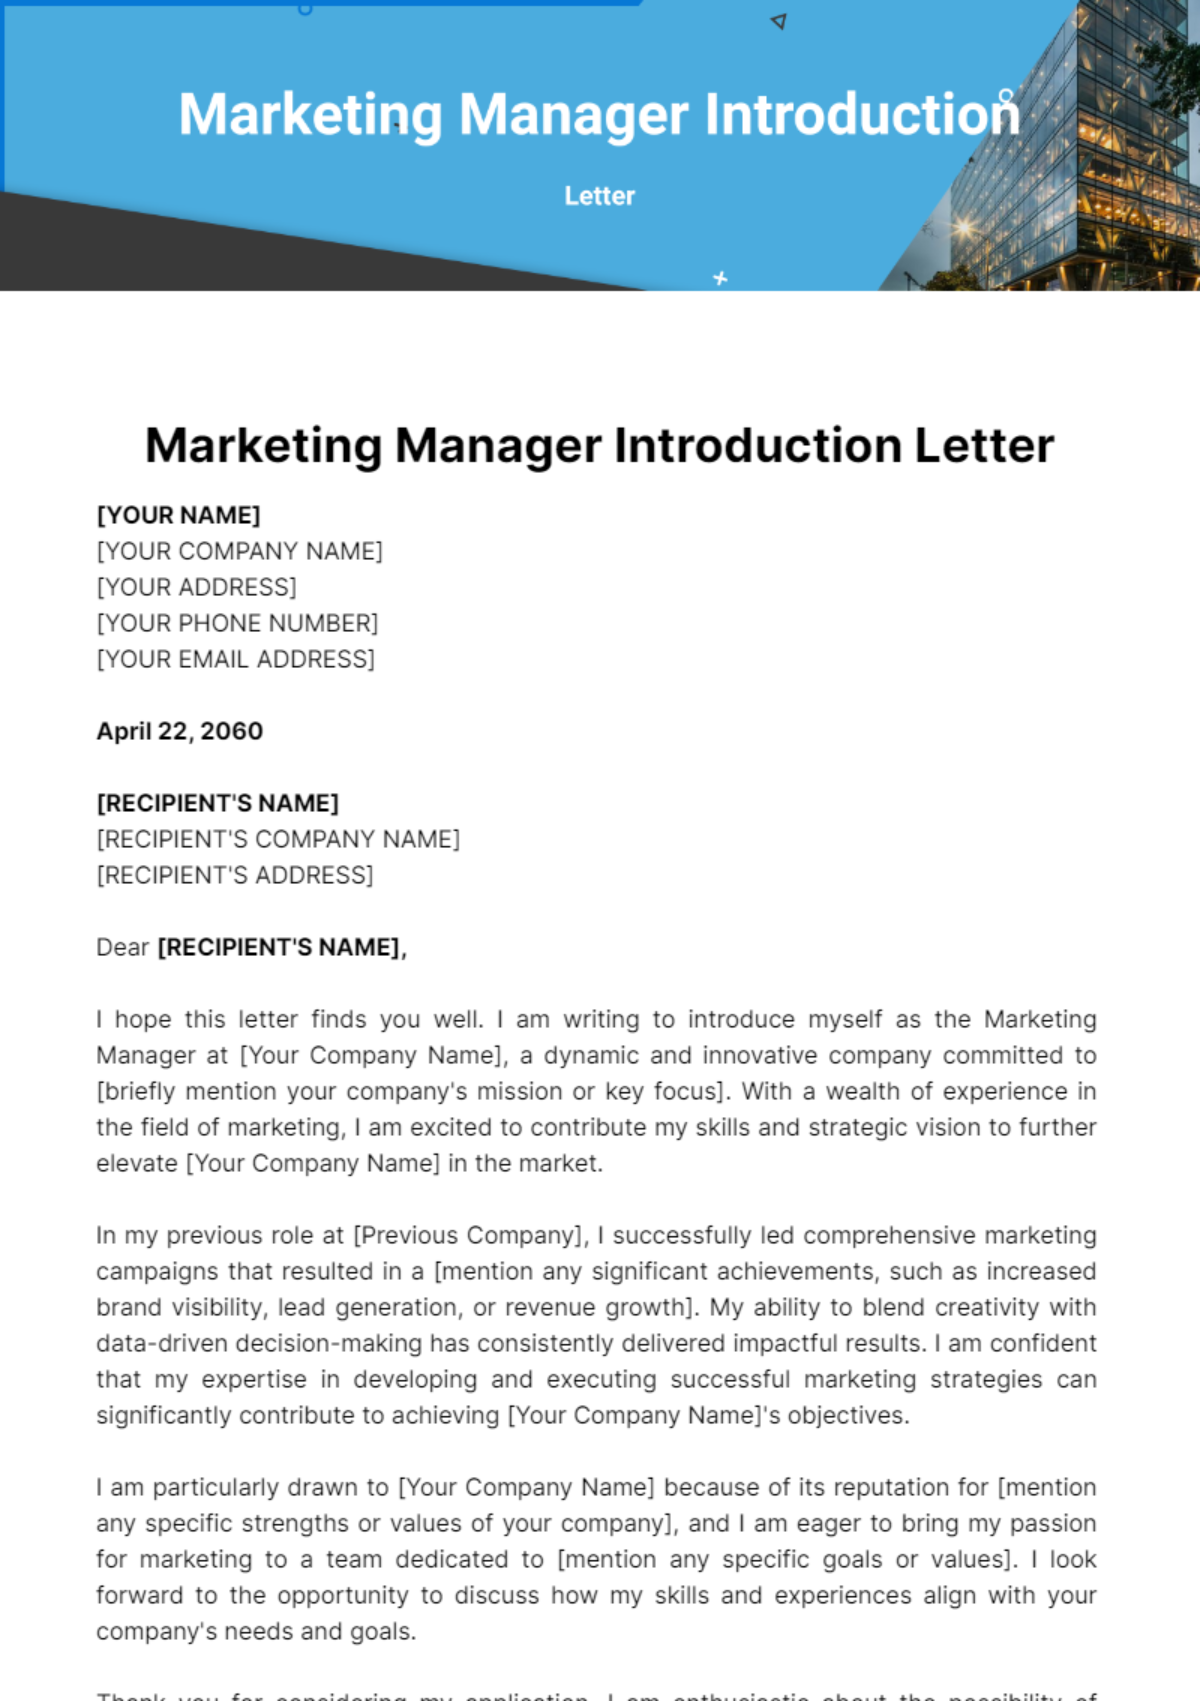 Free Marketing Manager Introduction Letter Template